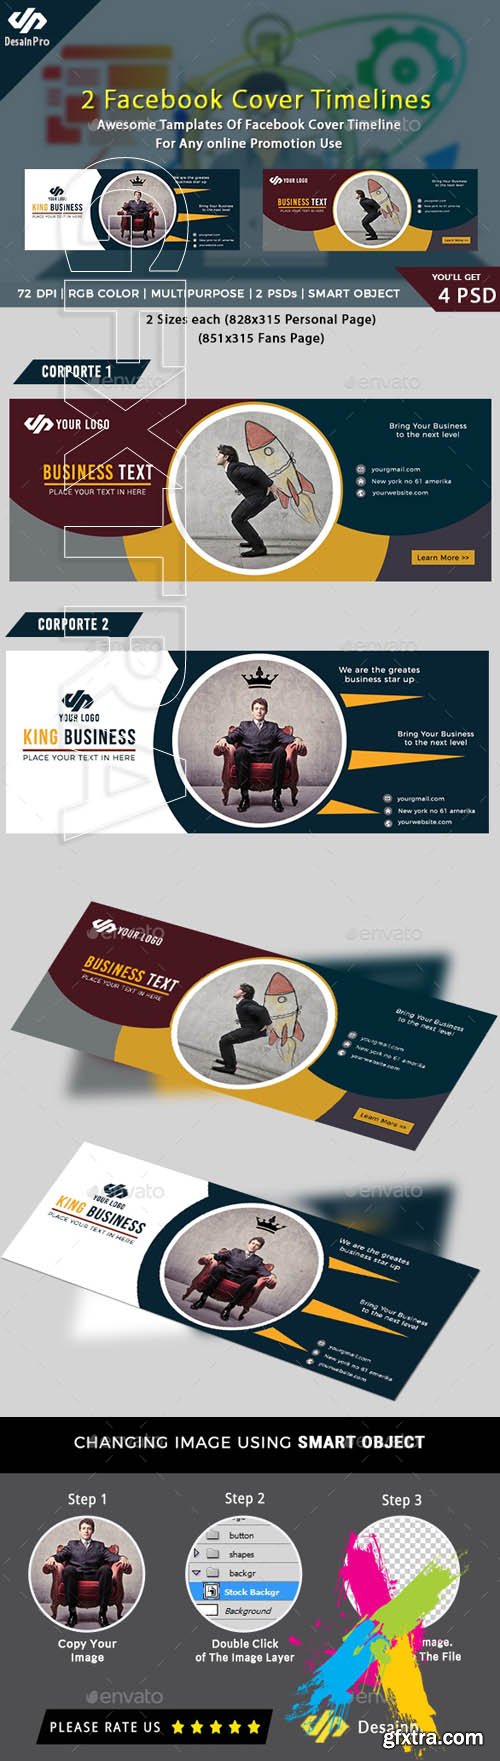 Graphicriver - 2 Business Corporate Facebook Cover Template 20144743